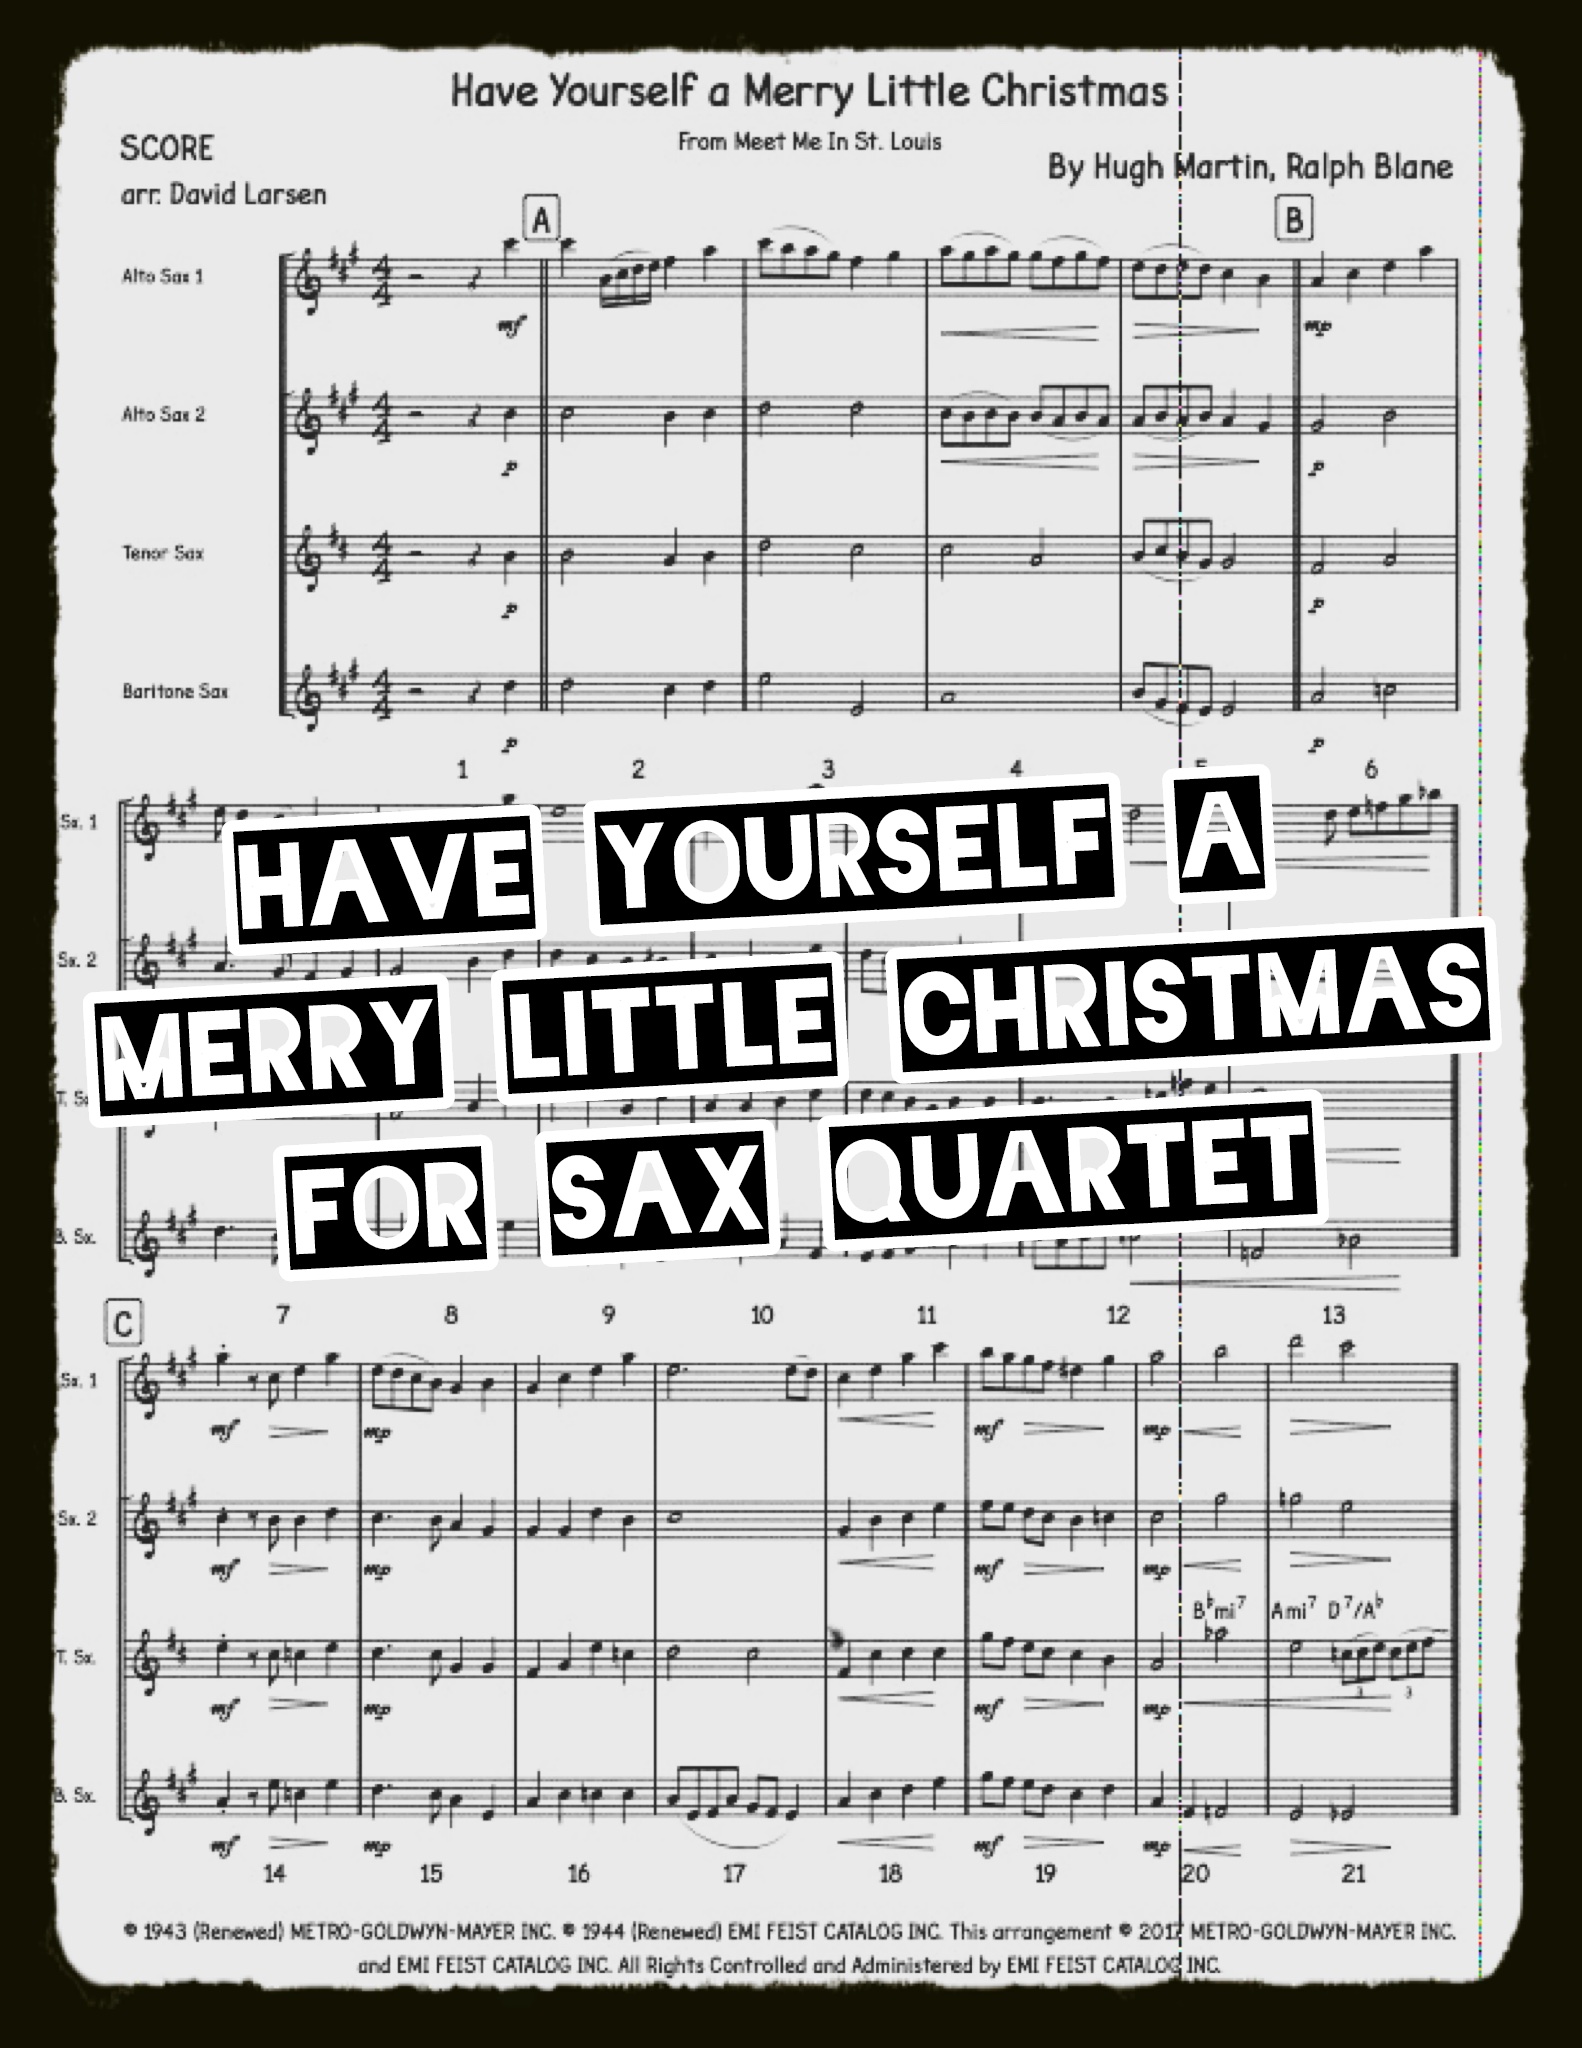 Have Yourself a Merry Little Christmas, arranged by David Larsen